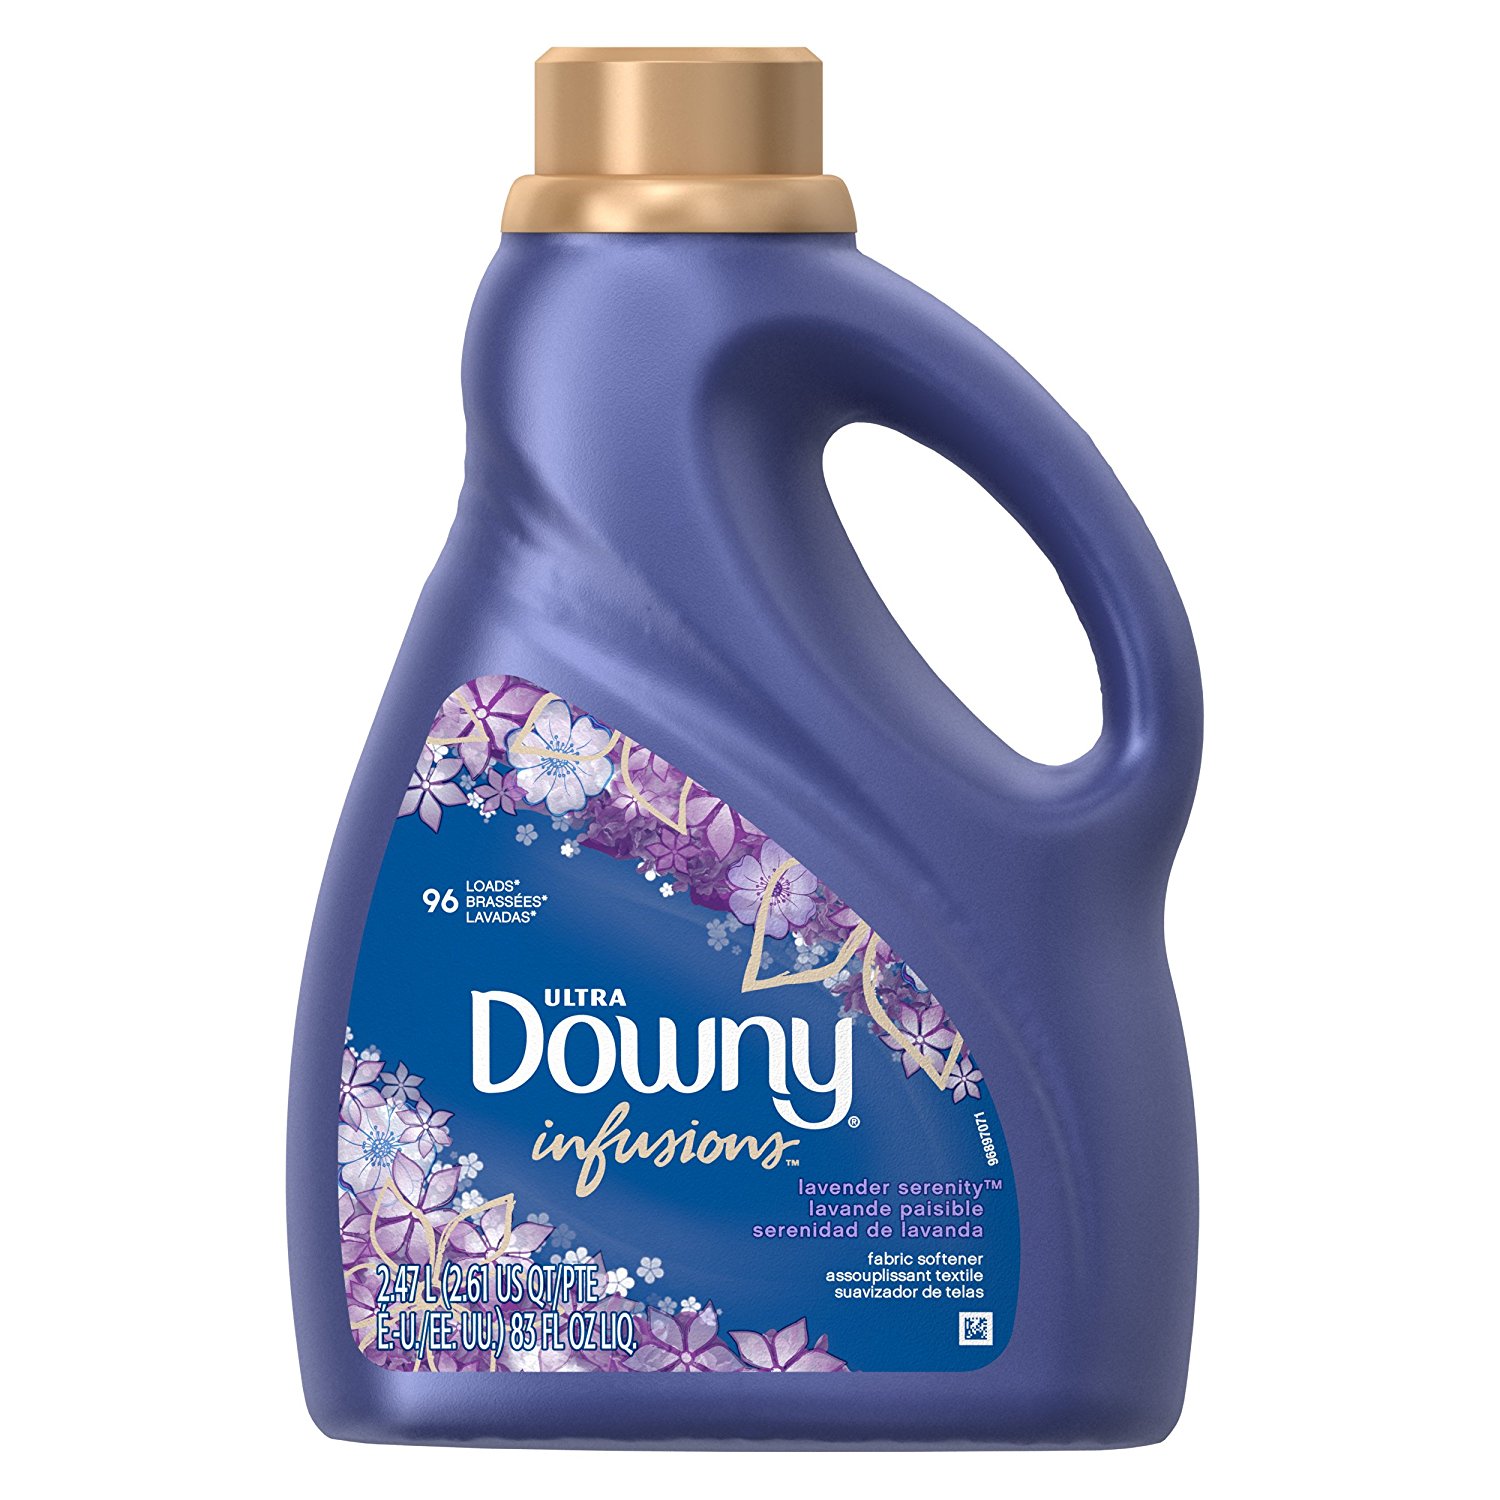 Top 5 Best Fabric Softeners in 2018 Reviews